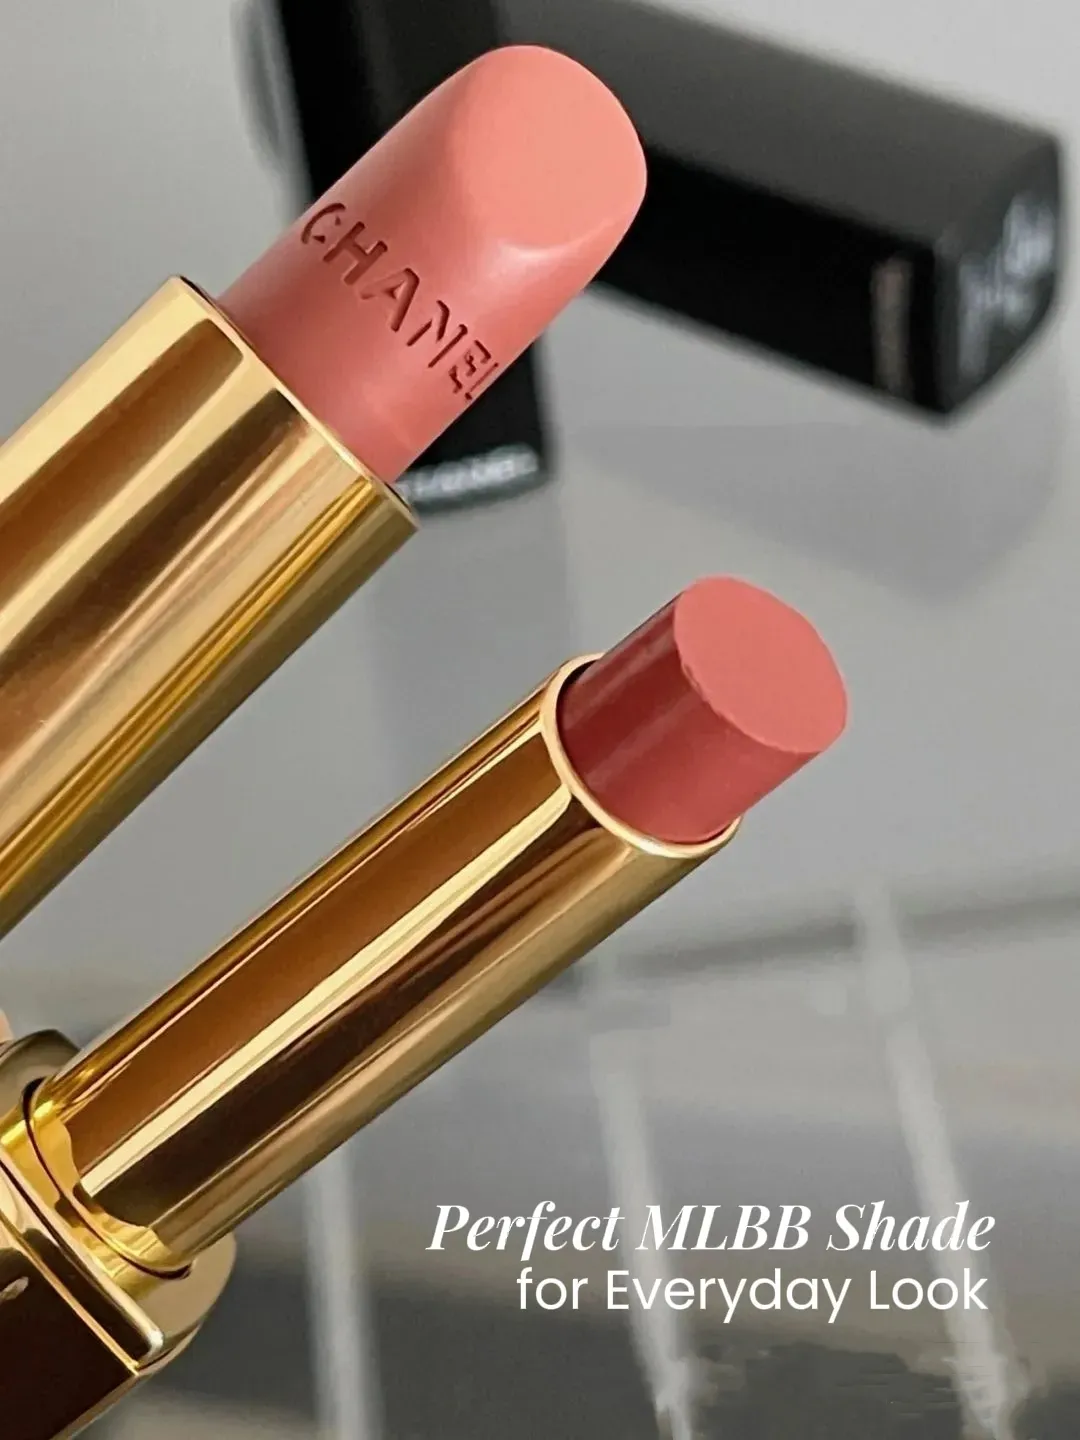 Chanel's newest “almond milk tea” lippie is the MLBB shade of our